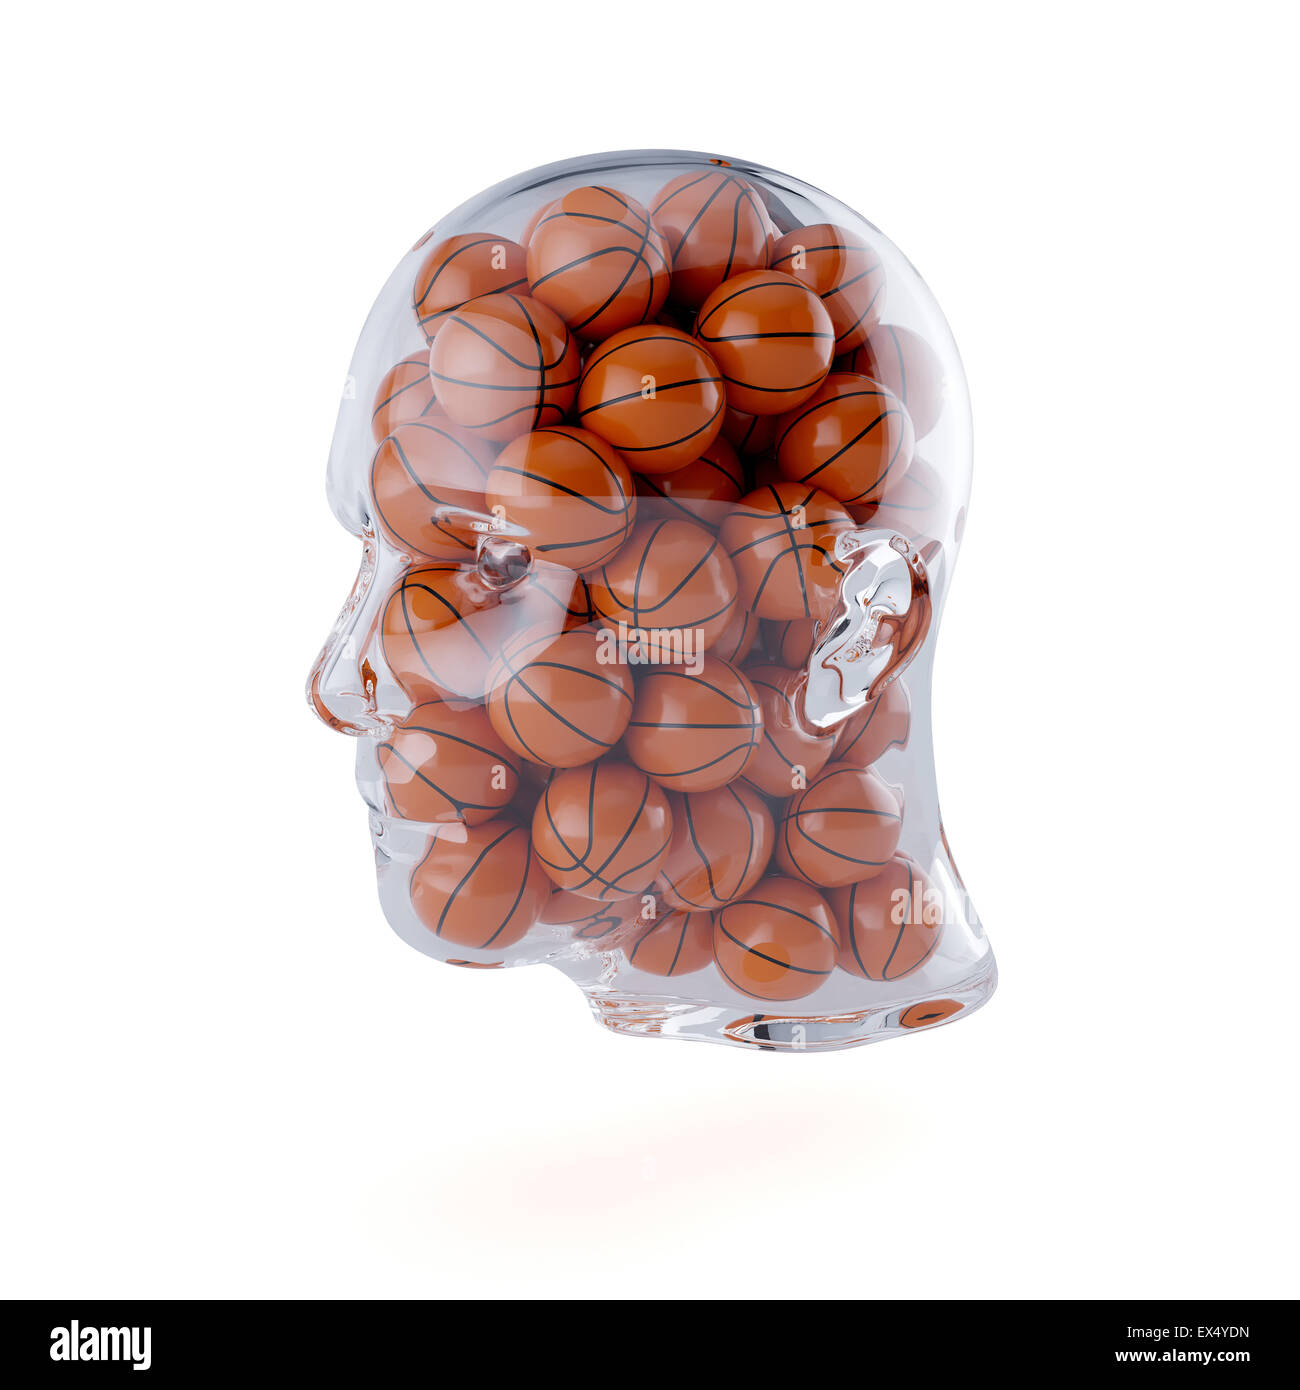 3d rendering of glass transparent human head filled with basketball balls. Isolated on white background. Player concept Stock Photo